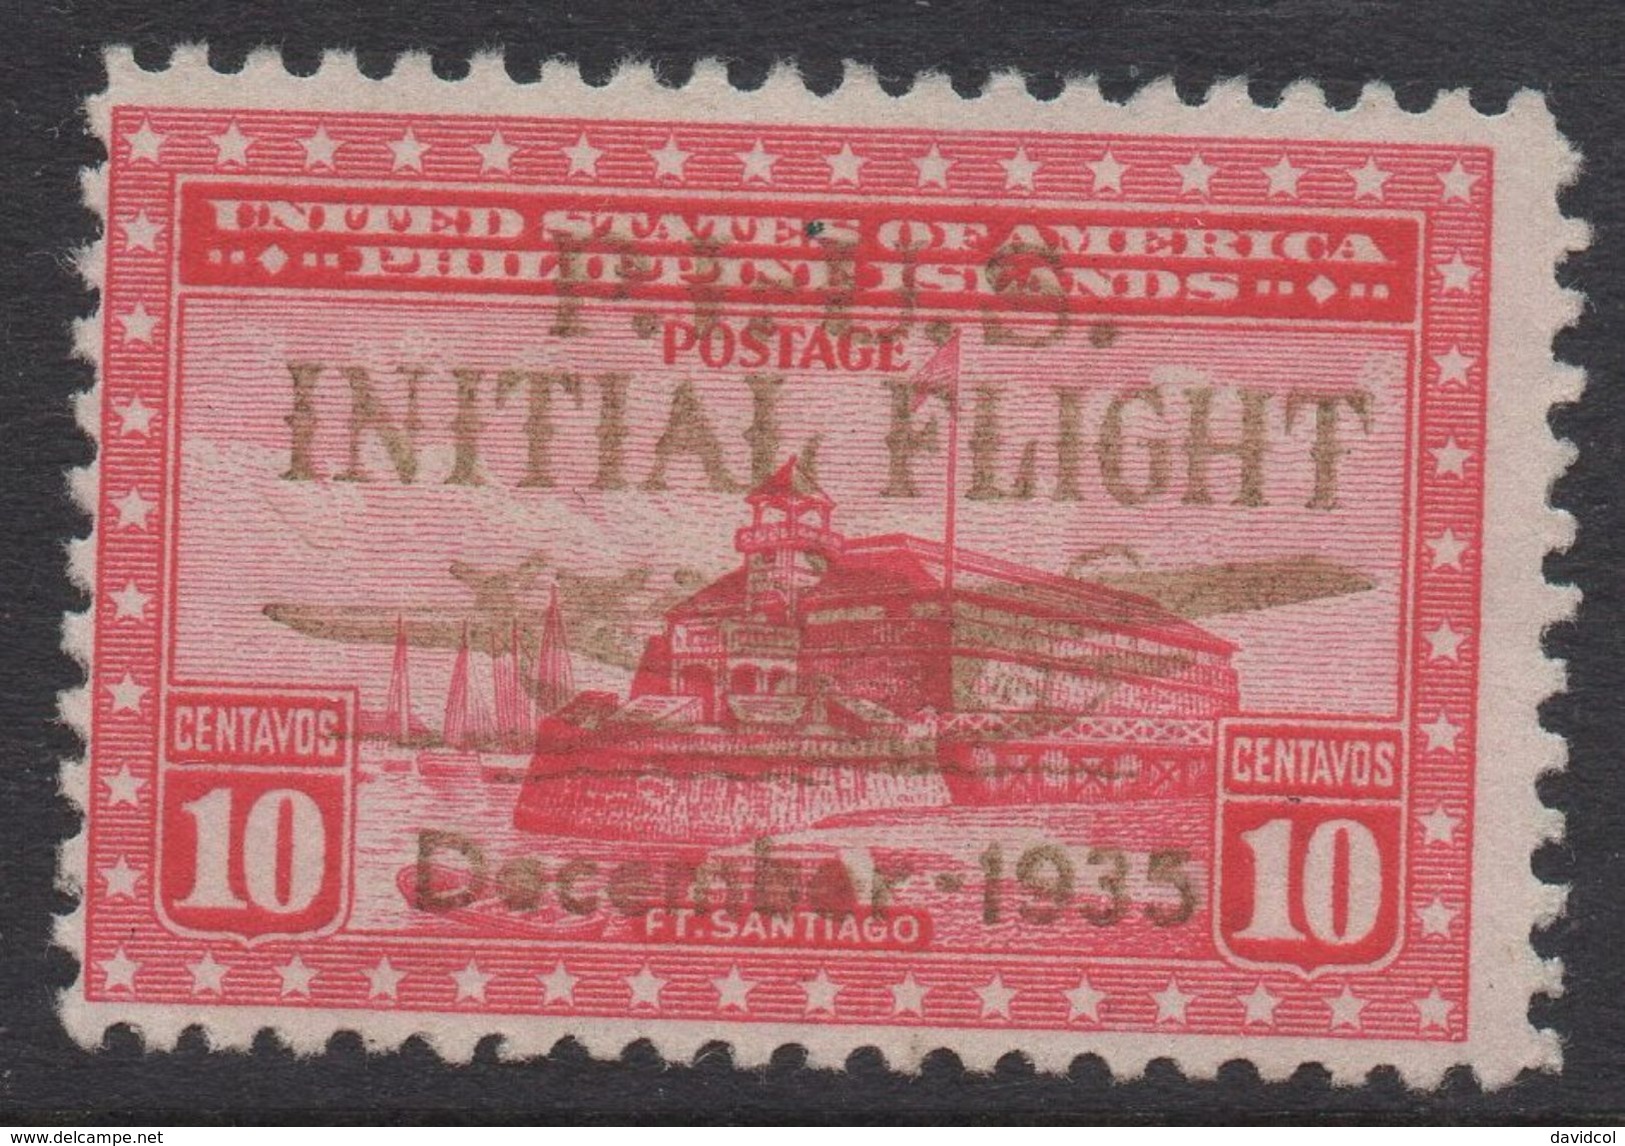 R279.-. USA- 1935 - OVERPRINTED - P.I.-US INITIAL FLIGHT -DECEMBER 1935- PHILIPPINES -USED - Philippinen